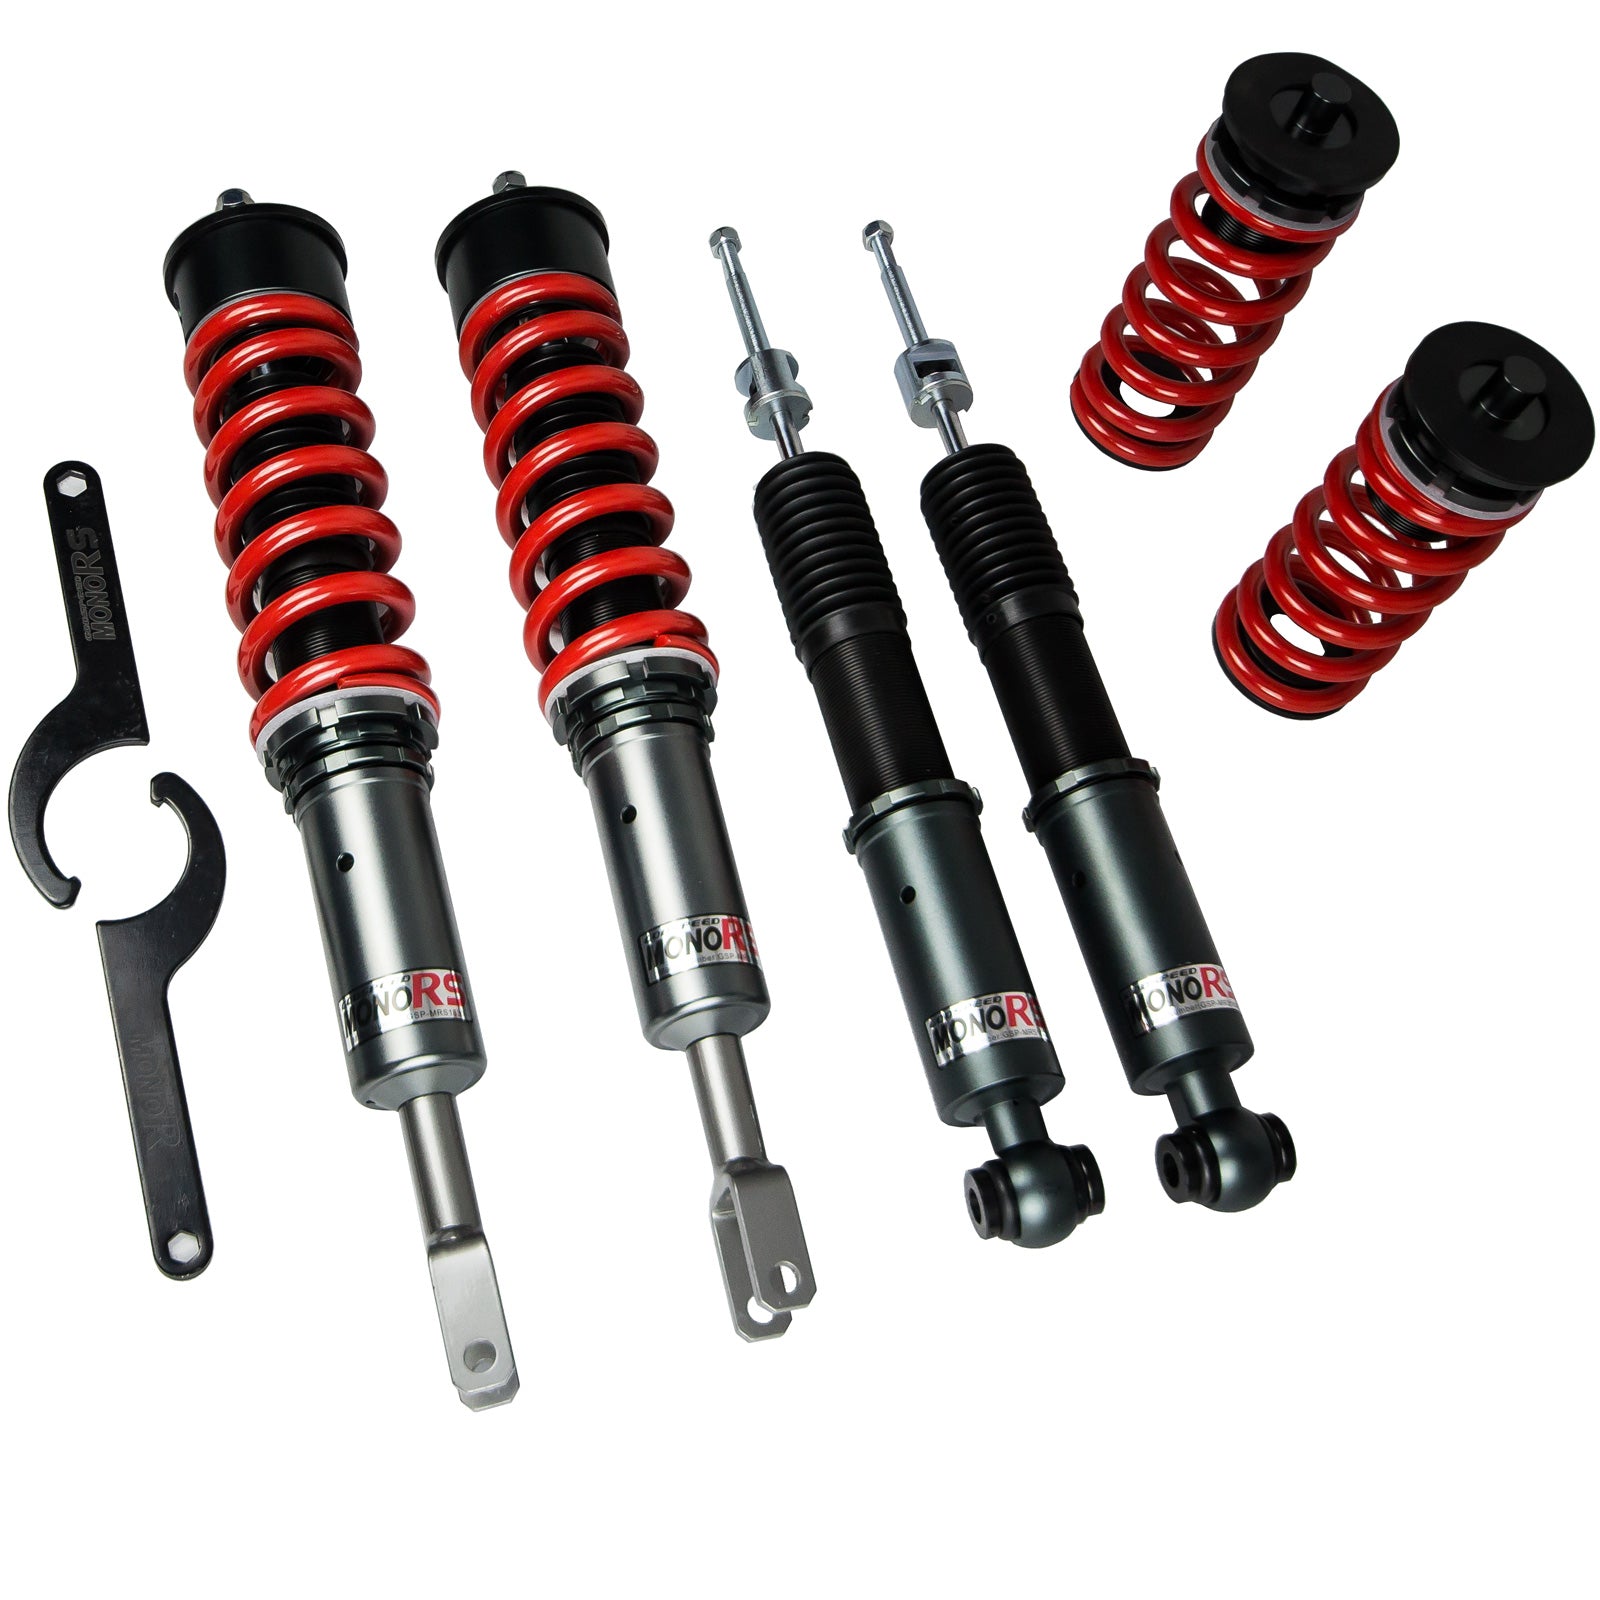 Godspeed MRS1830-B MonoRS Coilover Lowering Kit, 32 Damping Adjustment, Ride Height Adjustable